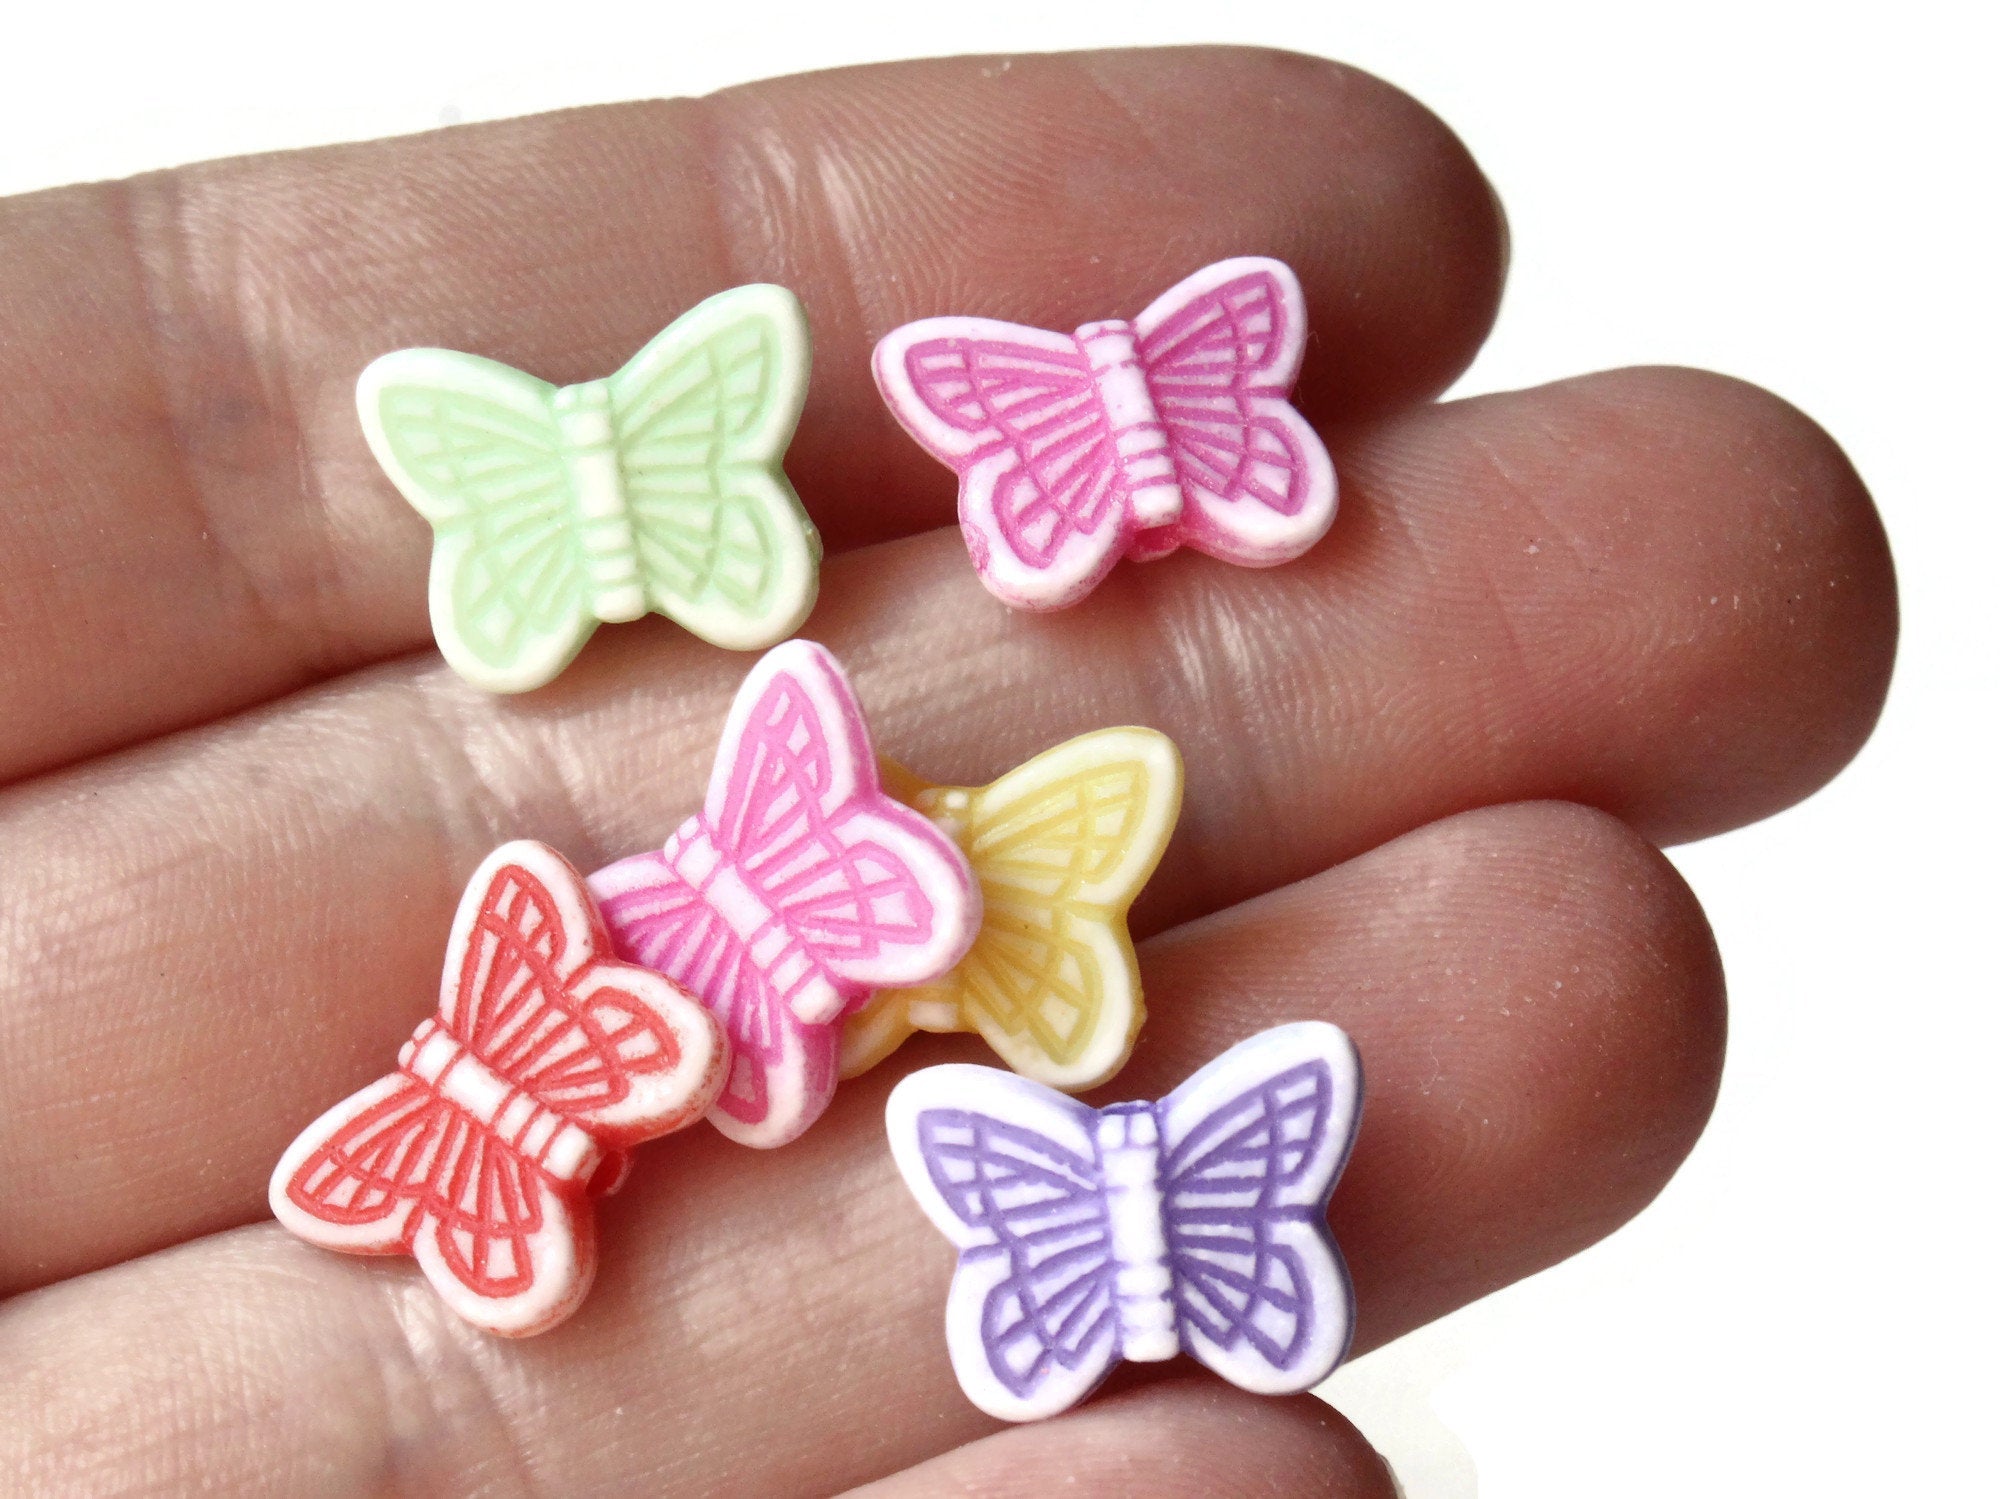 100 14mm Mixed Color Butterfly Beads Plastic Butterflies Loose Acrylic Moth Beads Animal Beads by Smileyboy | Michaels